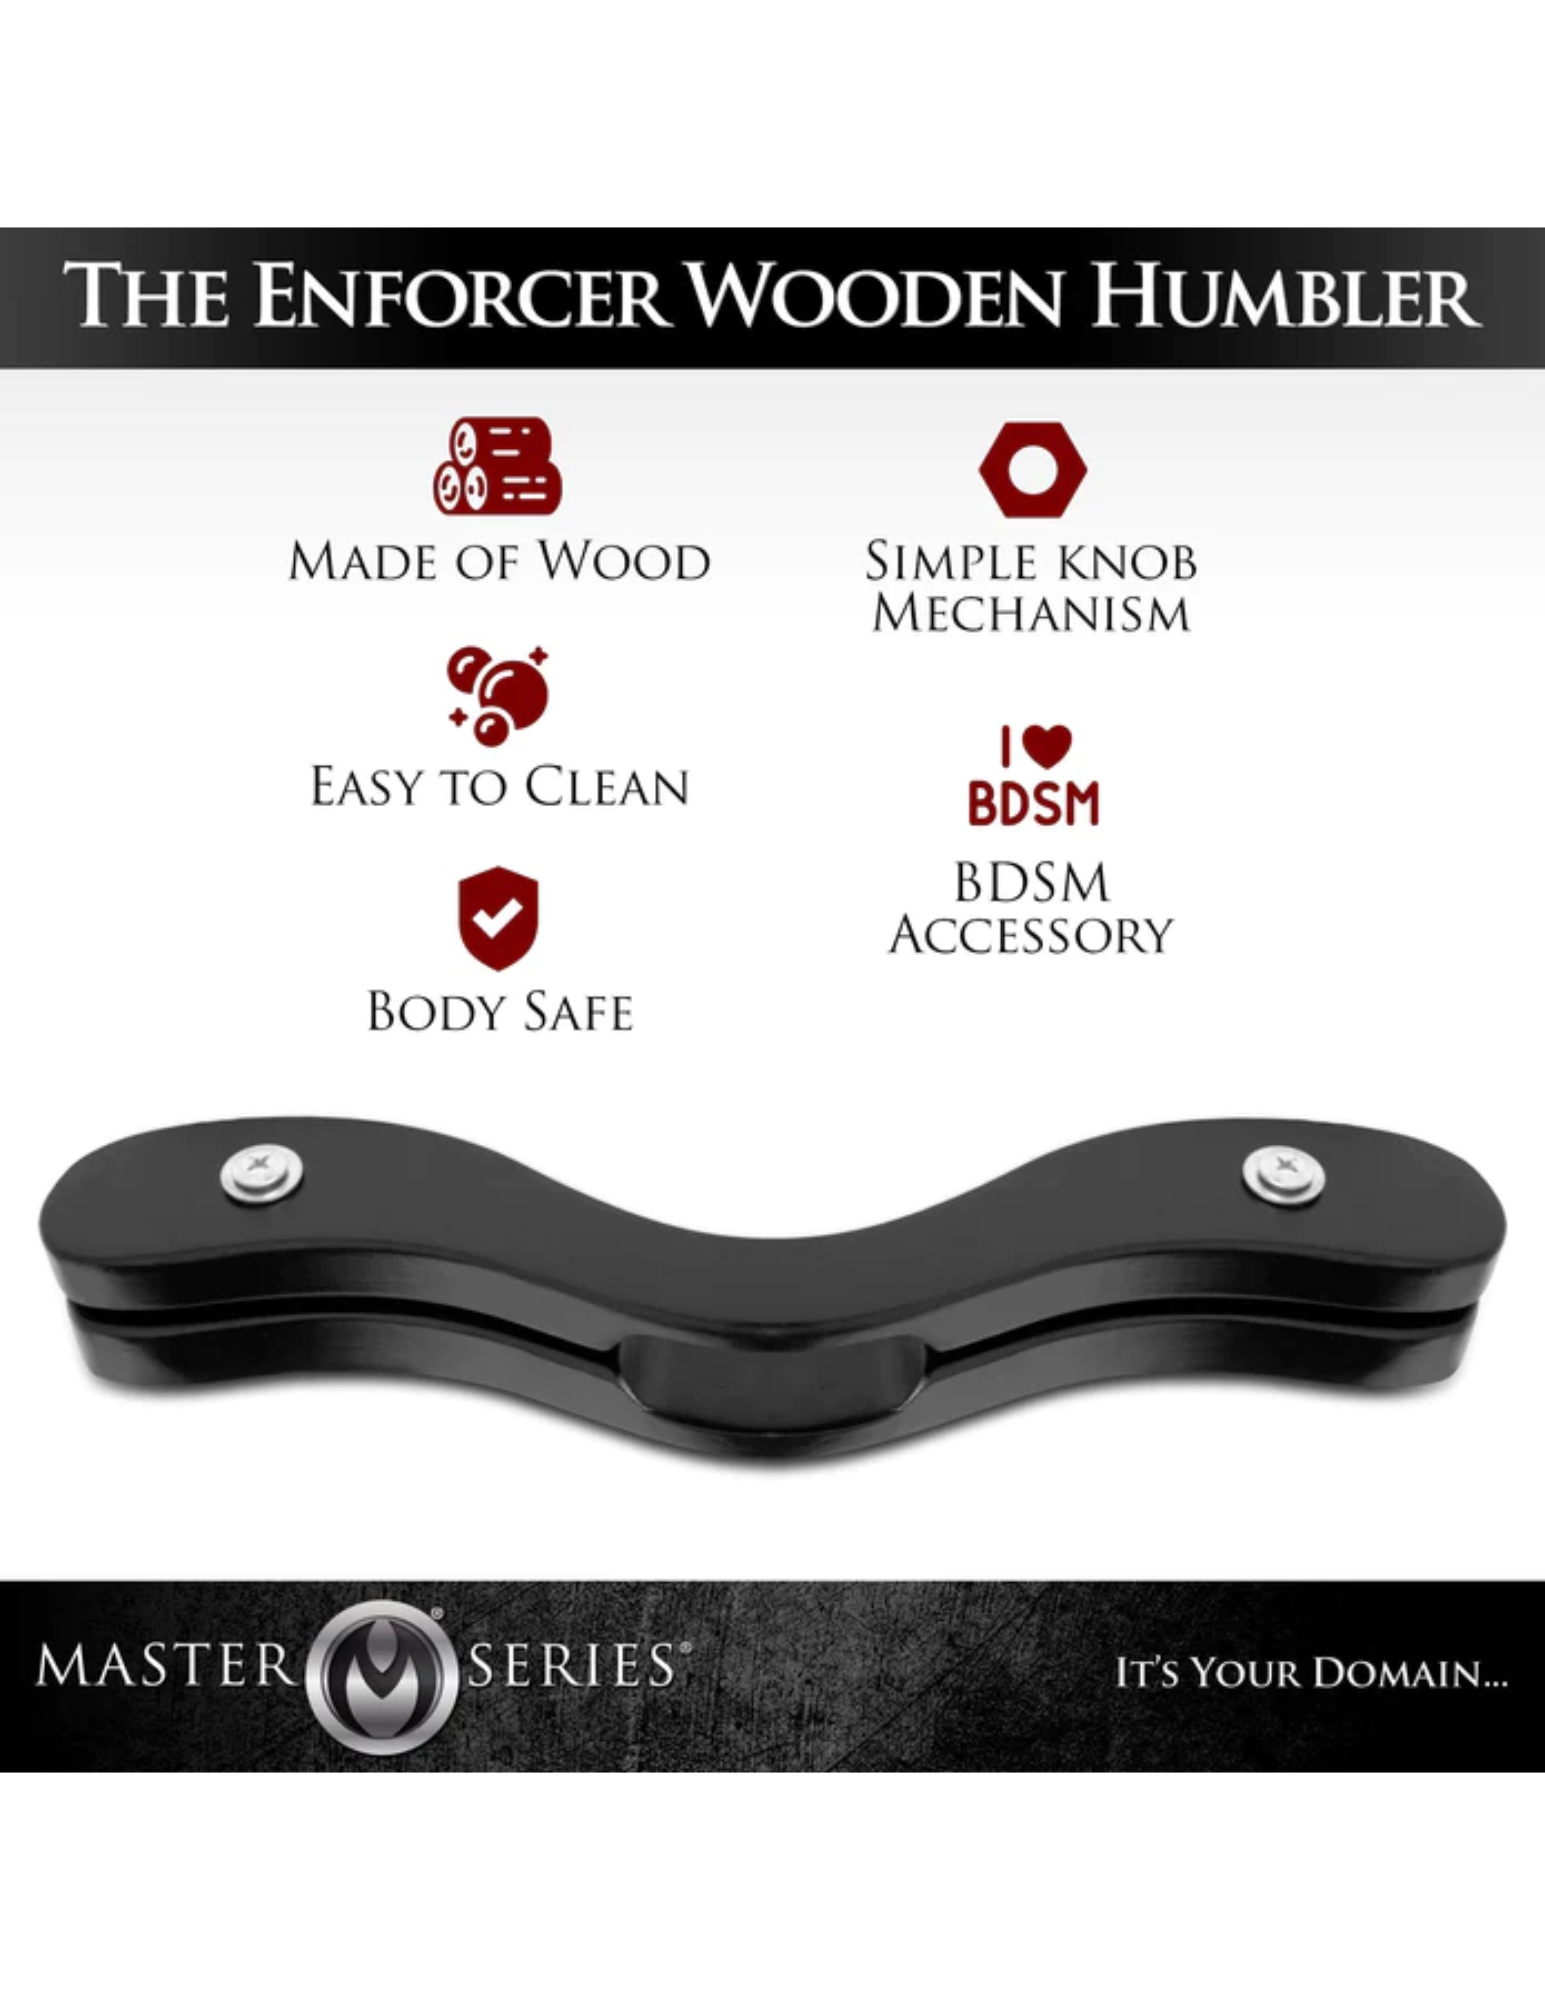 Ad for the Enforcer featuring: made of wood, simple knob mechanism, easy to clean, body safe, BDSM accessory.